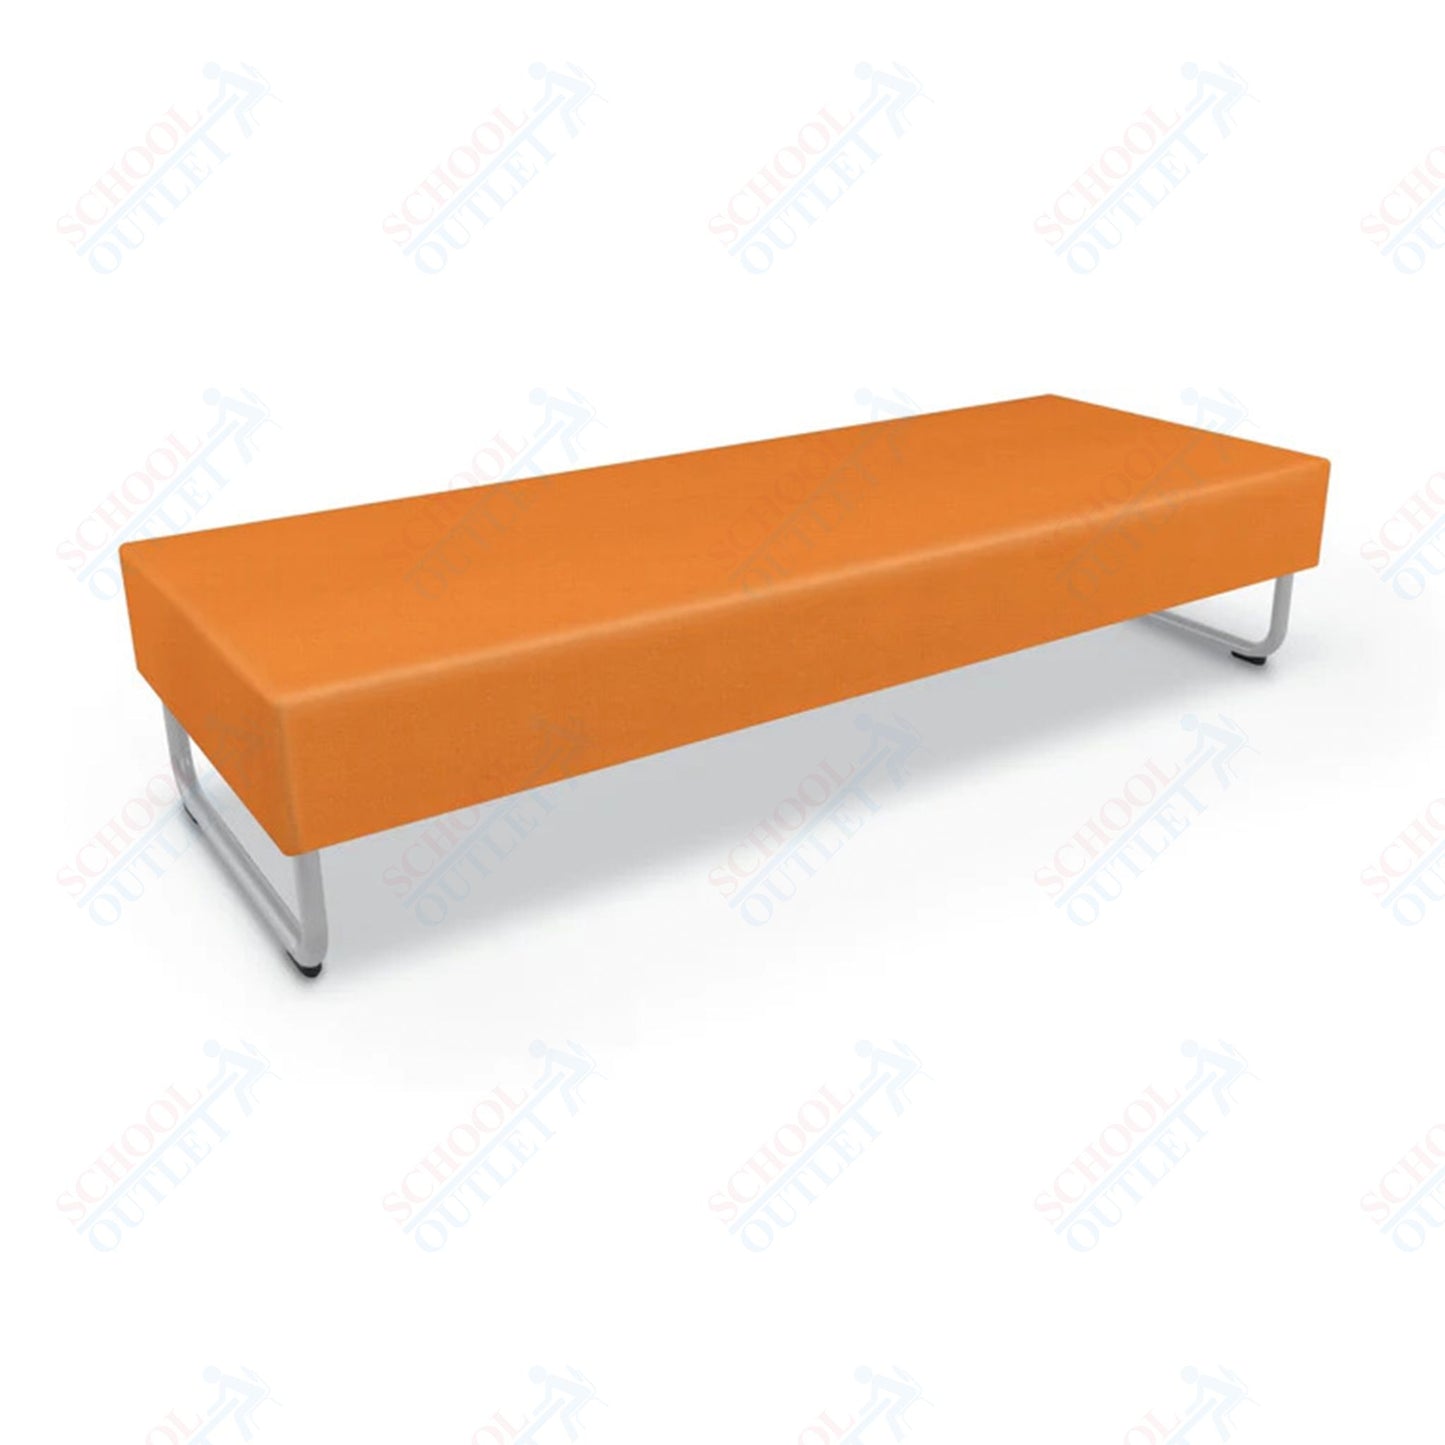 Mooreco Akt Soft Seating Lounge Sofa Bench - Grade 02 Fabric and Powder Coated Sled Legs